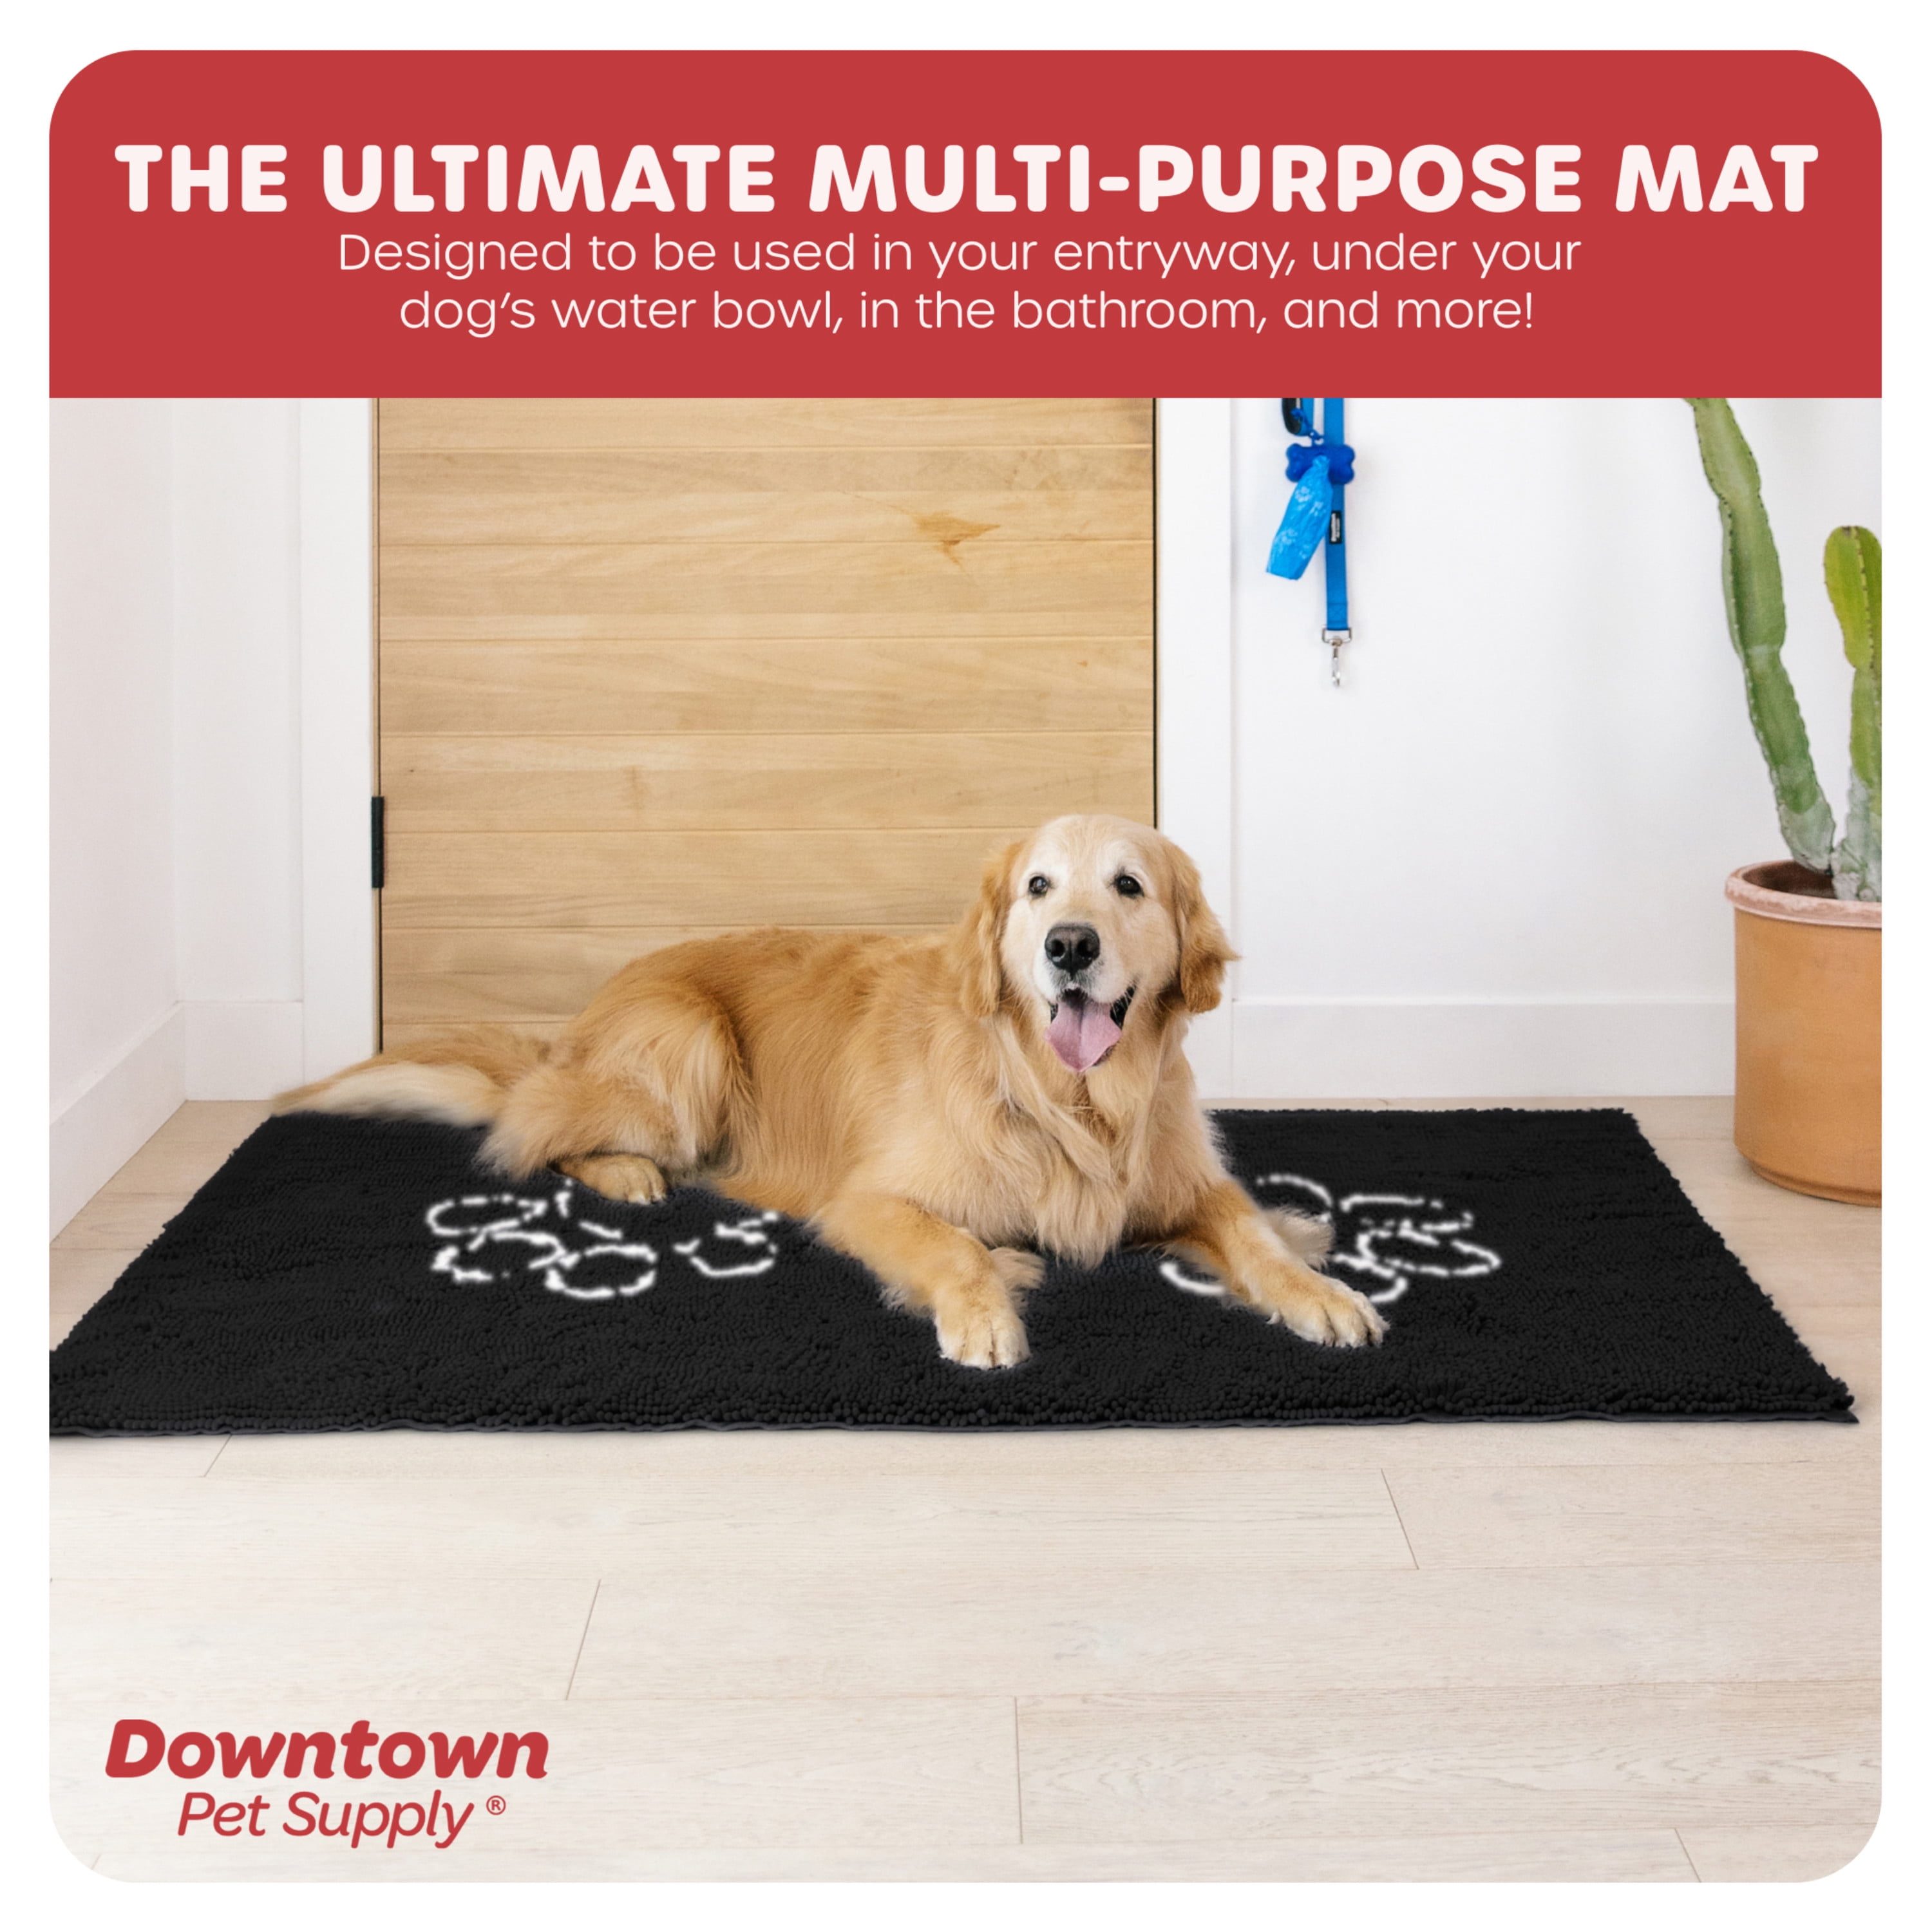 My Doggy Place Dog Mat for Muddy Paws, Washable Dog Door Mat, Black, Runner,  XL 